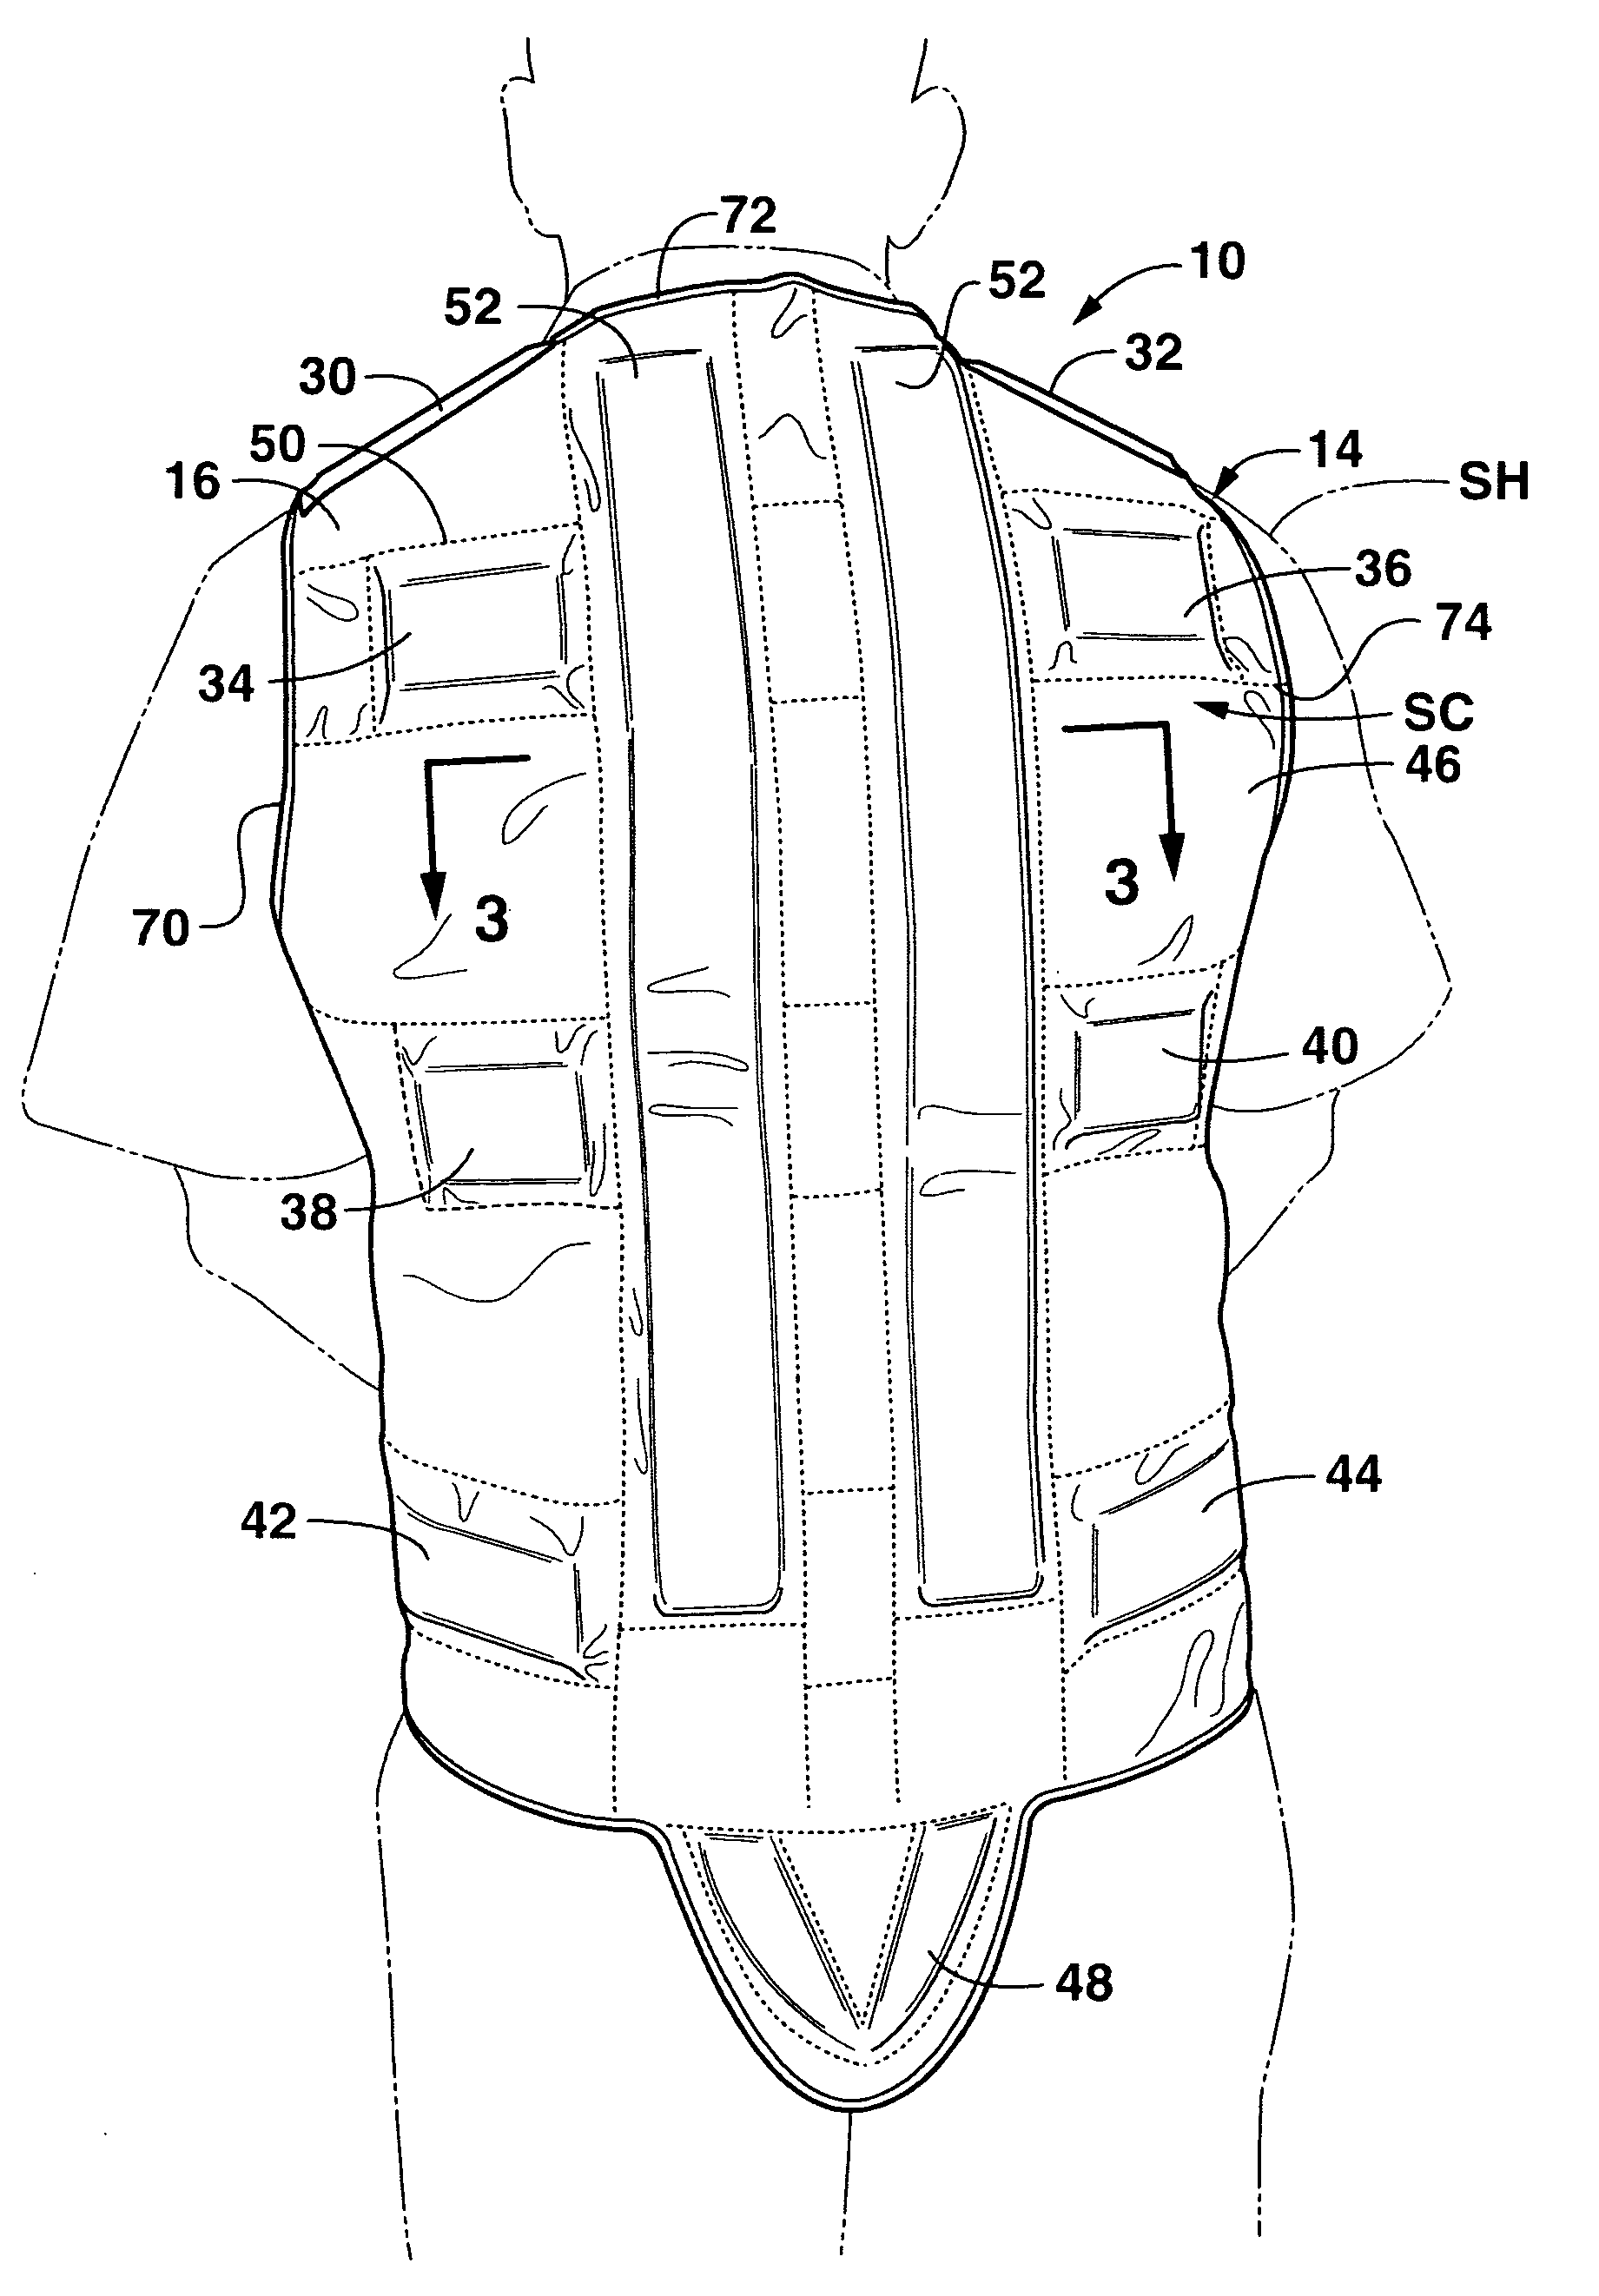 Biomechanical protective system